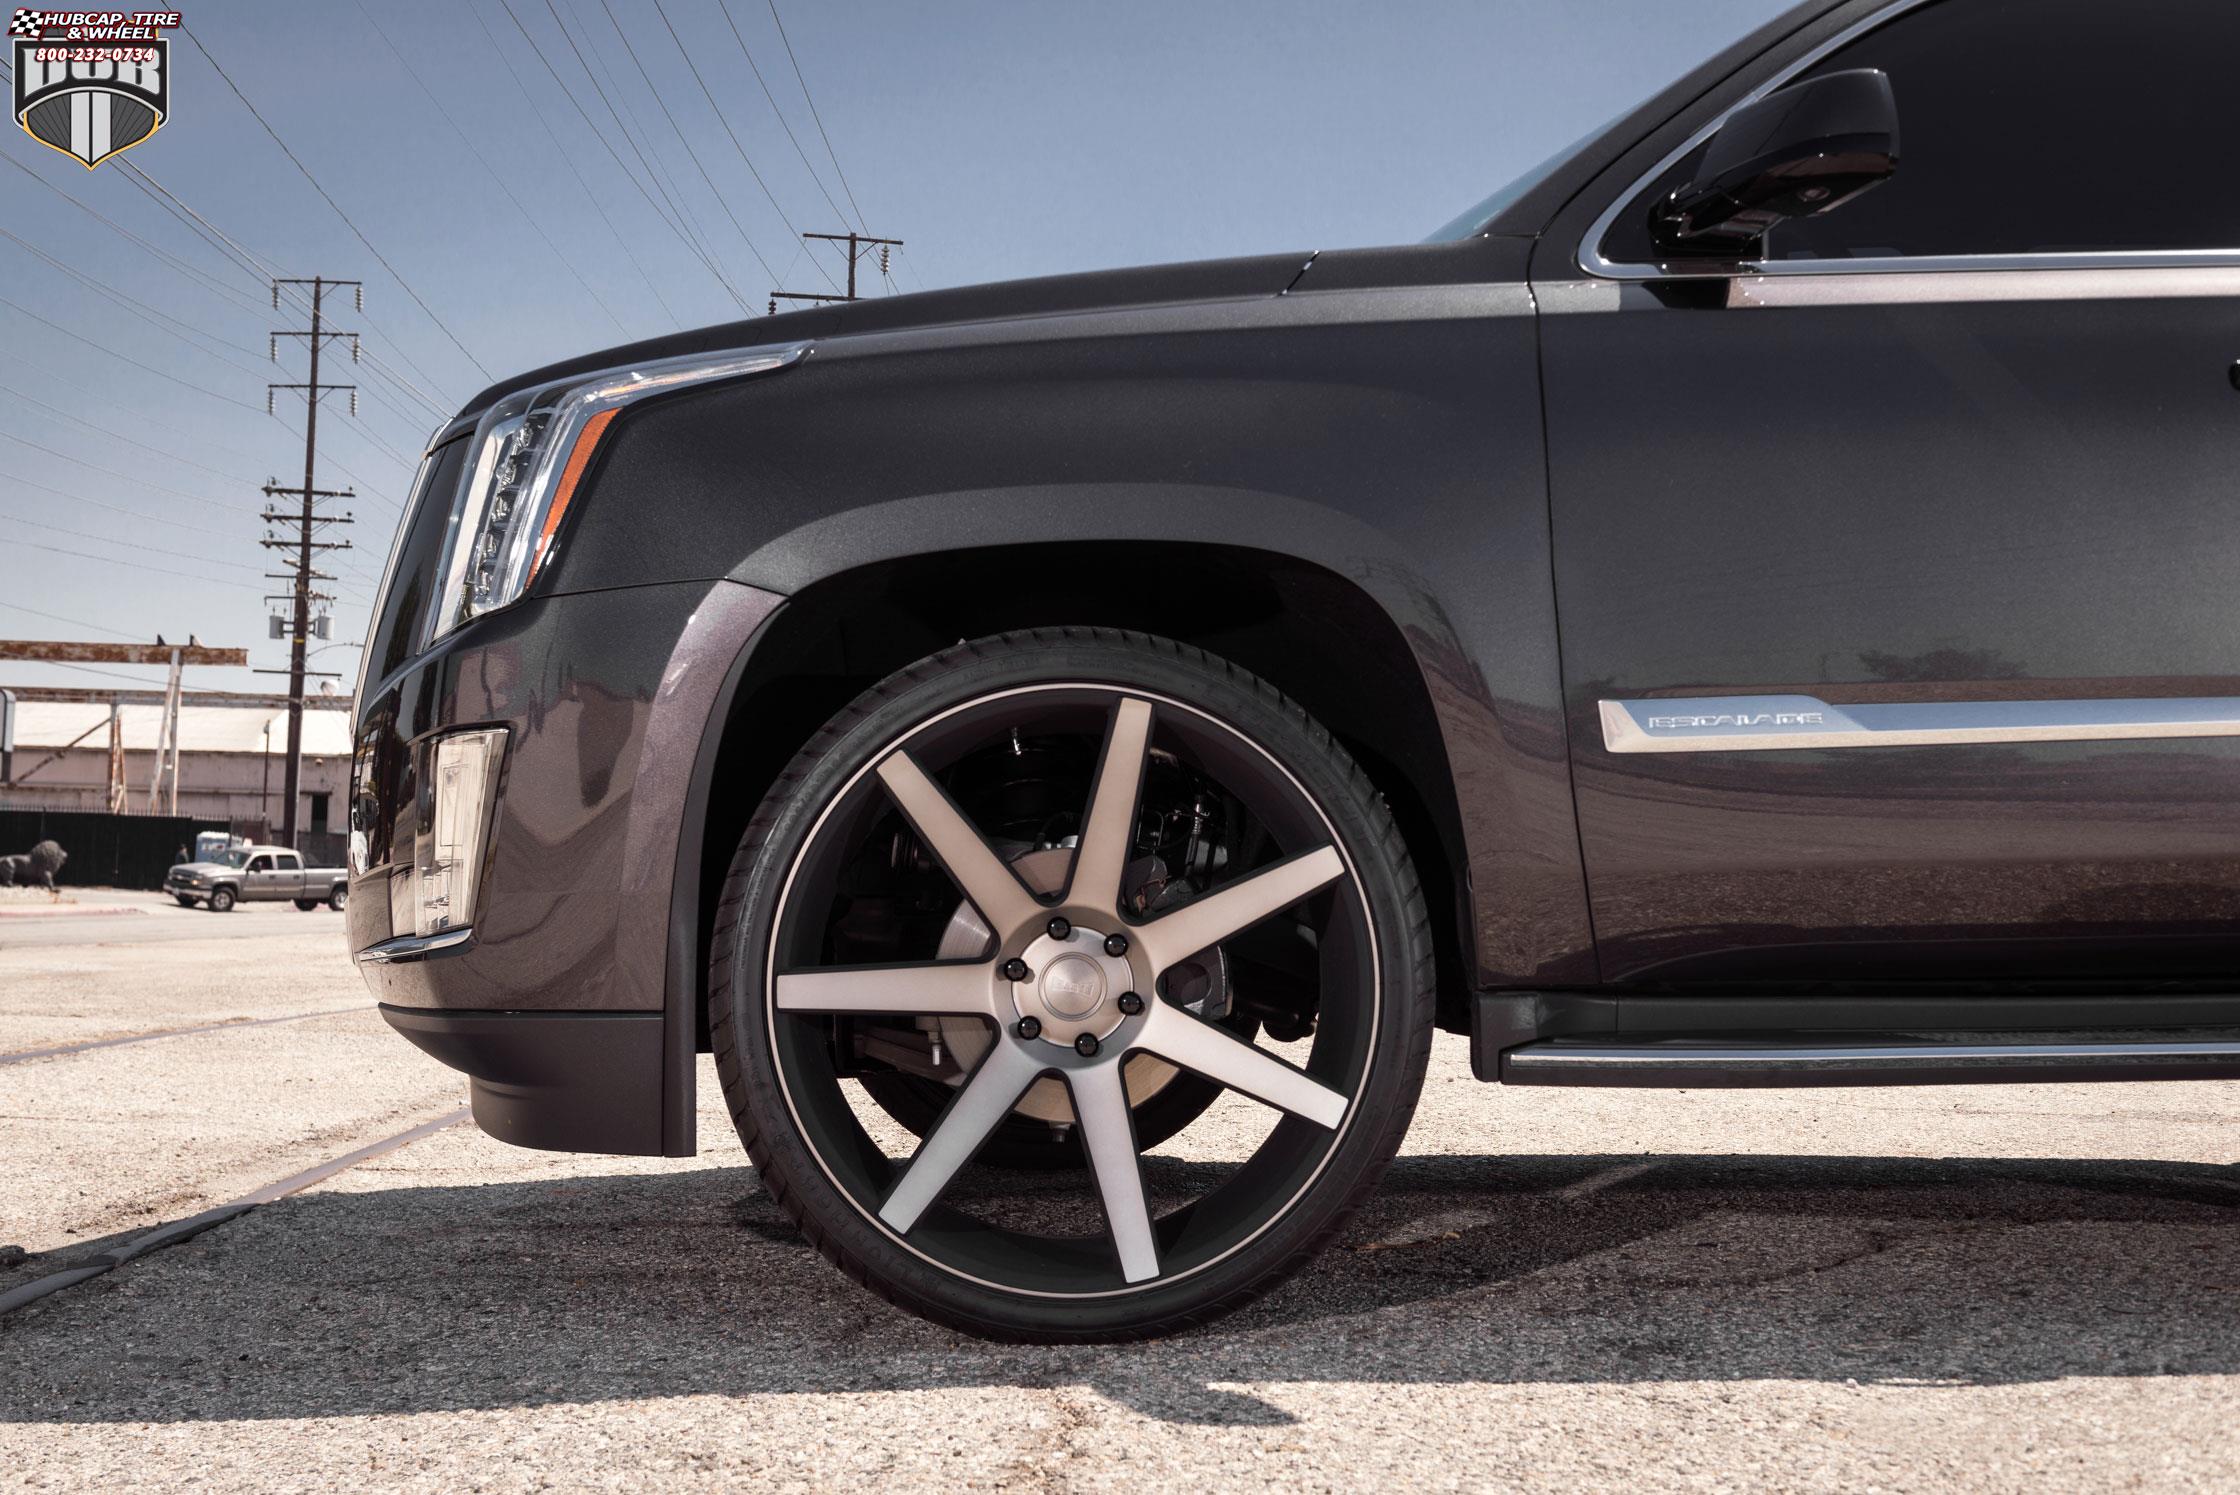 vehicle gallery/cadillac escalade dub future s127 26X10  Black & Machined with Dark Tint wheels and rims